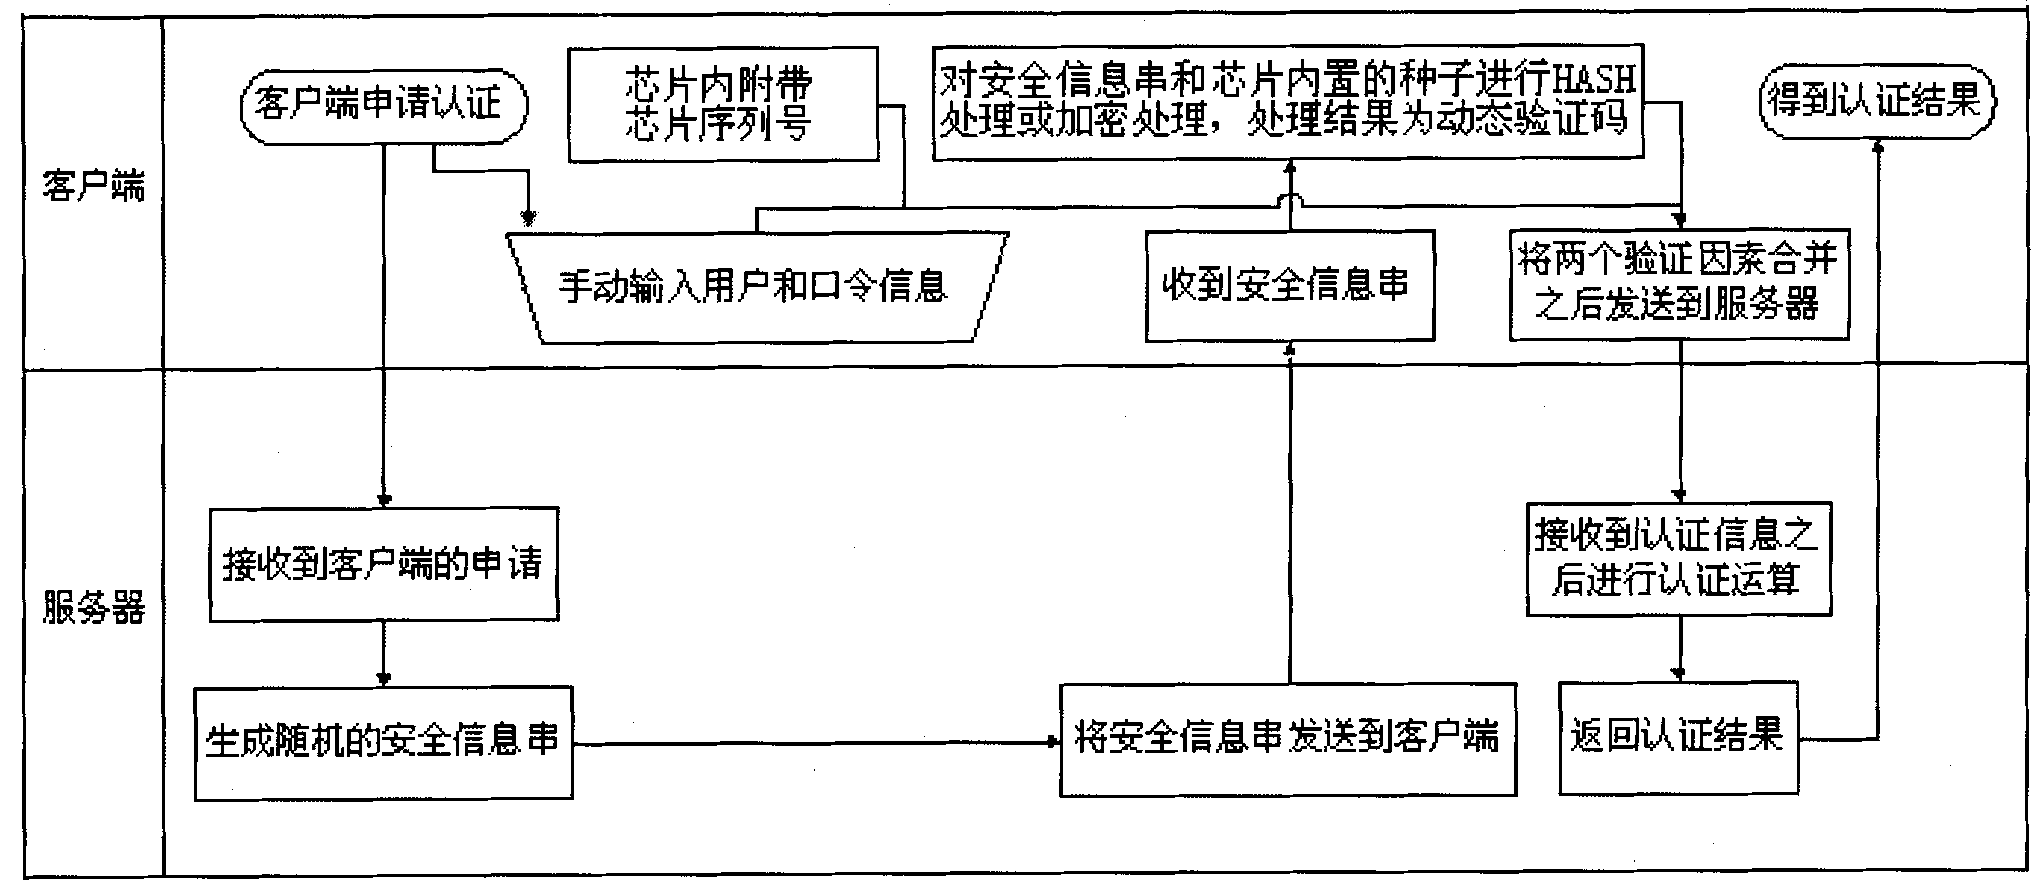 Dual-factor authentication method based on HASH chip or encryption chip